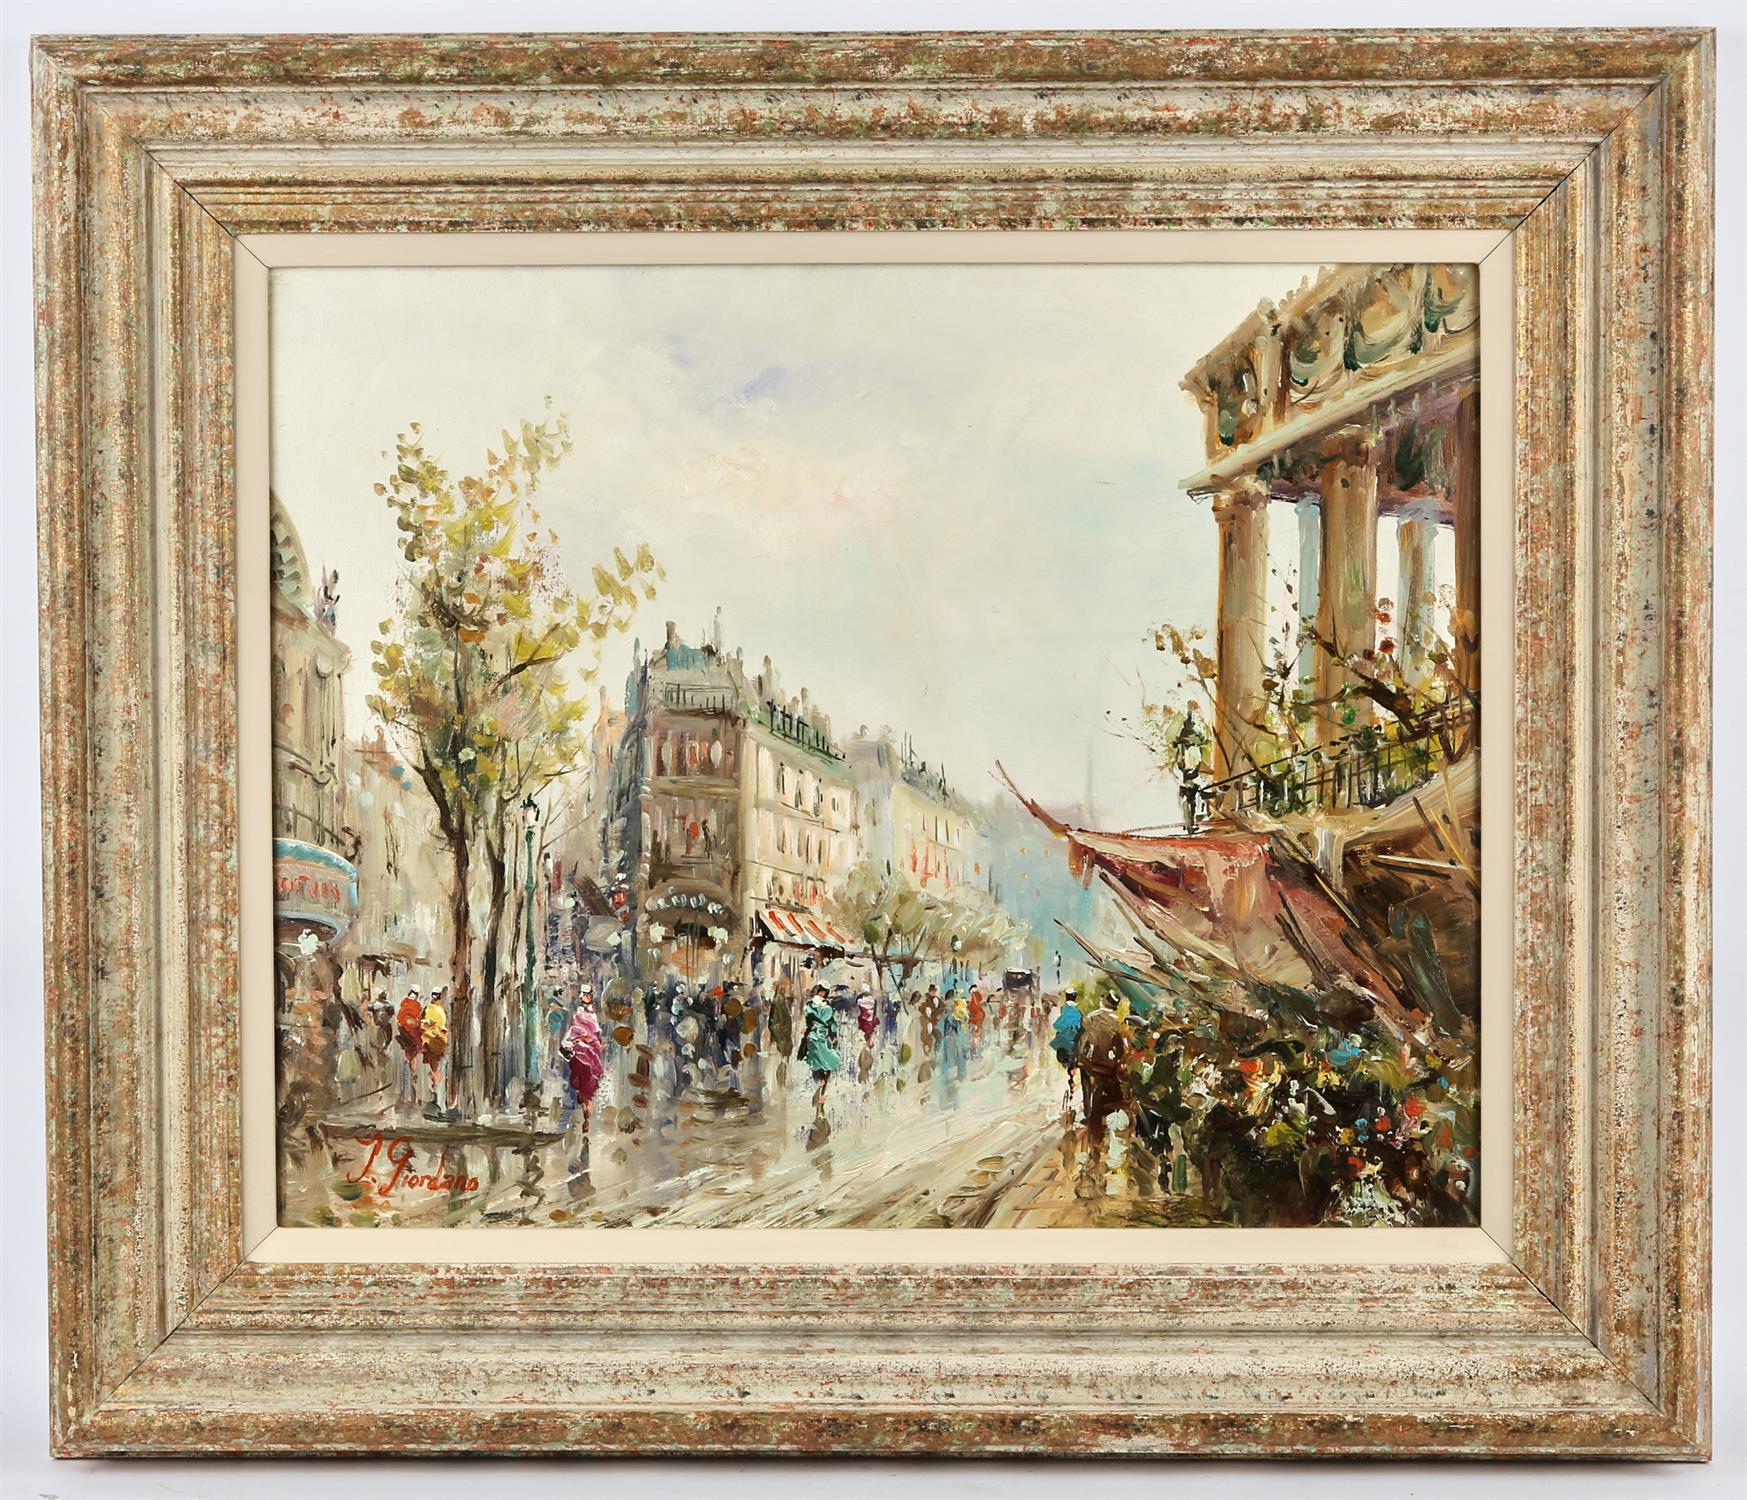 J. Giordano (20th century), Paris Street scene; The Moulin Rouge, Paris, a pair, oil on canvas, - Image 2 of 4